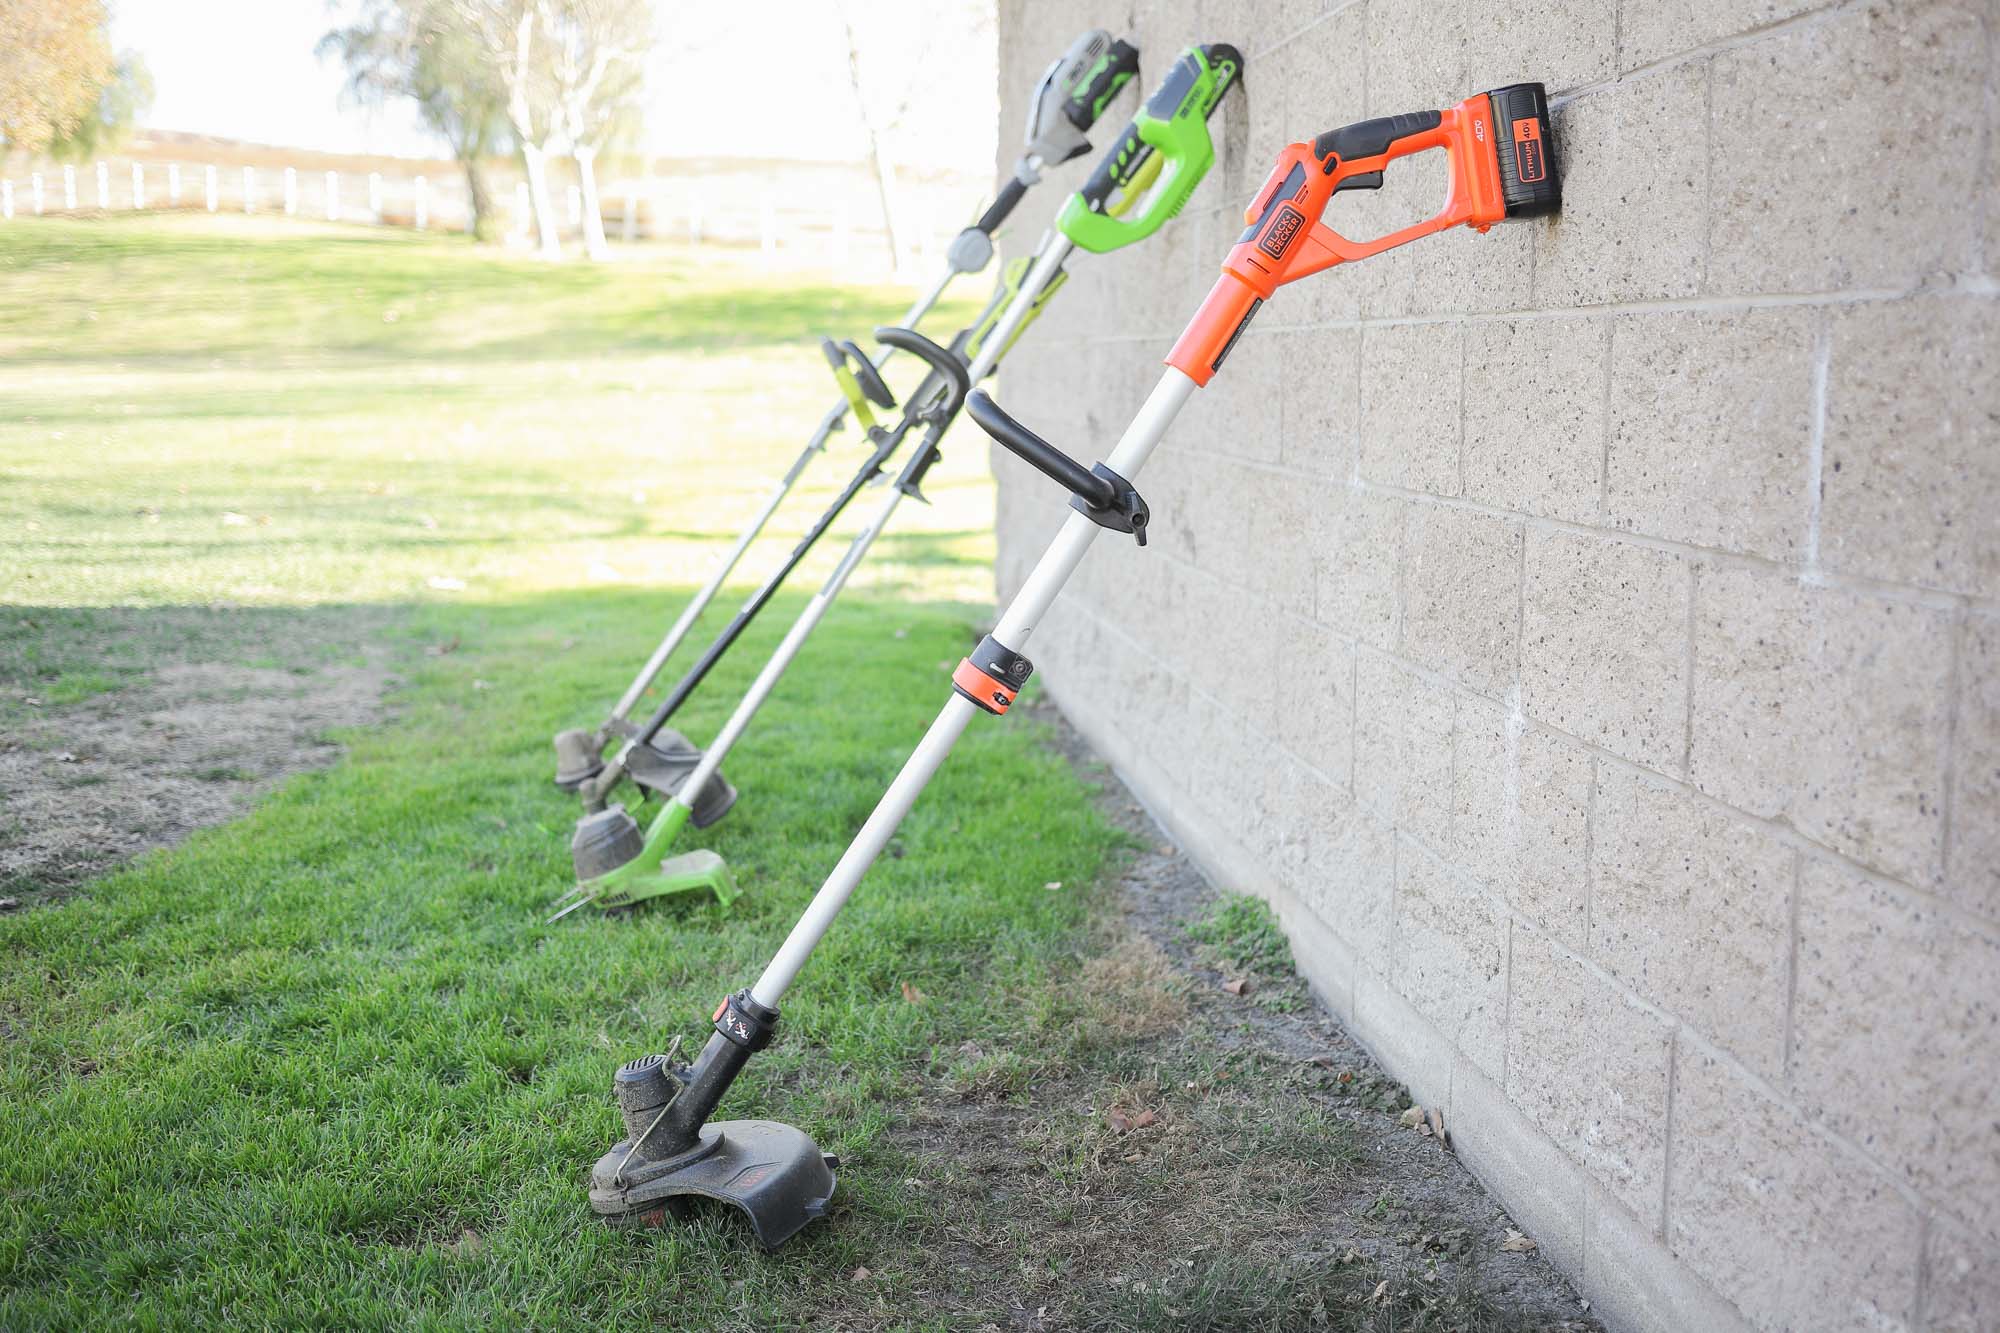 Black+Decker LST140C String Trimmer Review - Consumer Reports